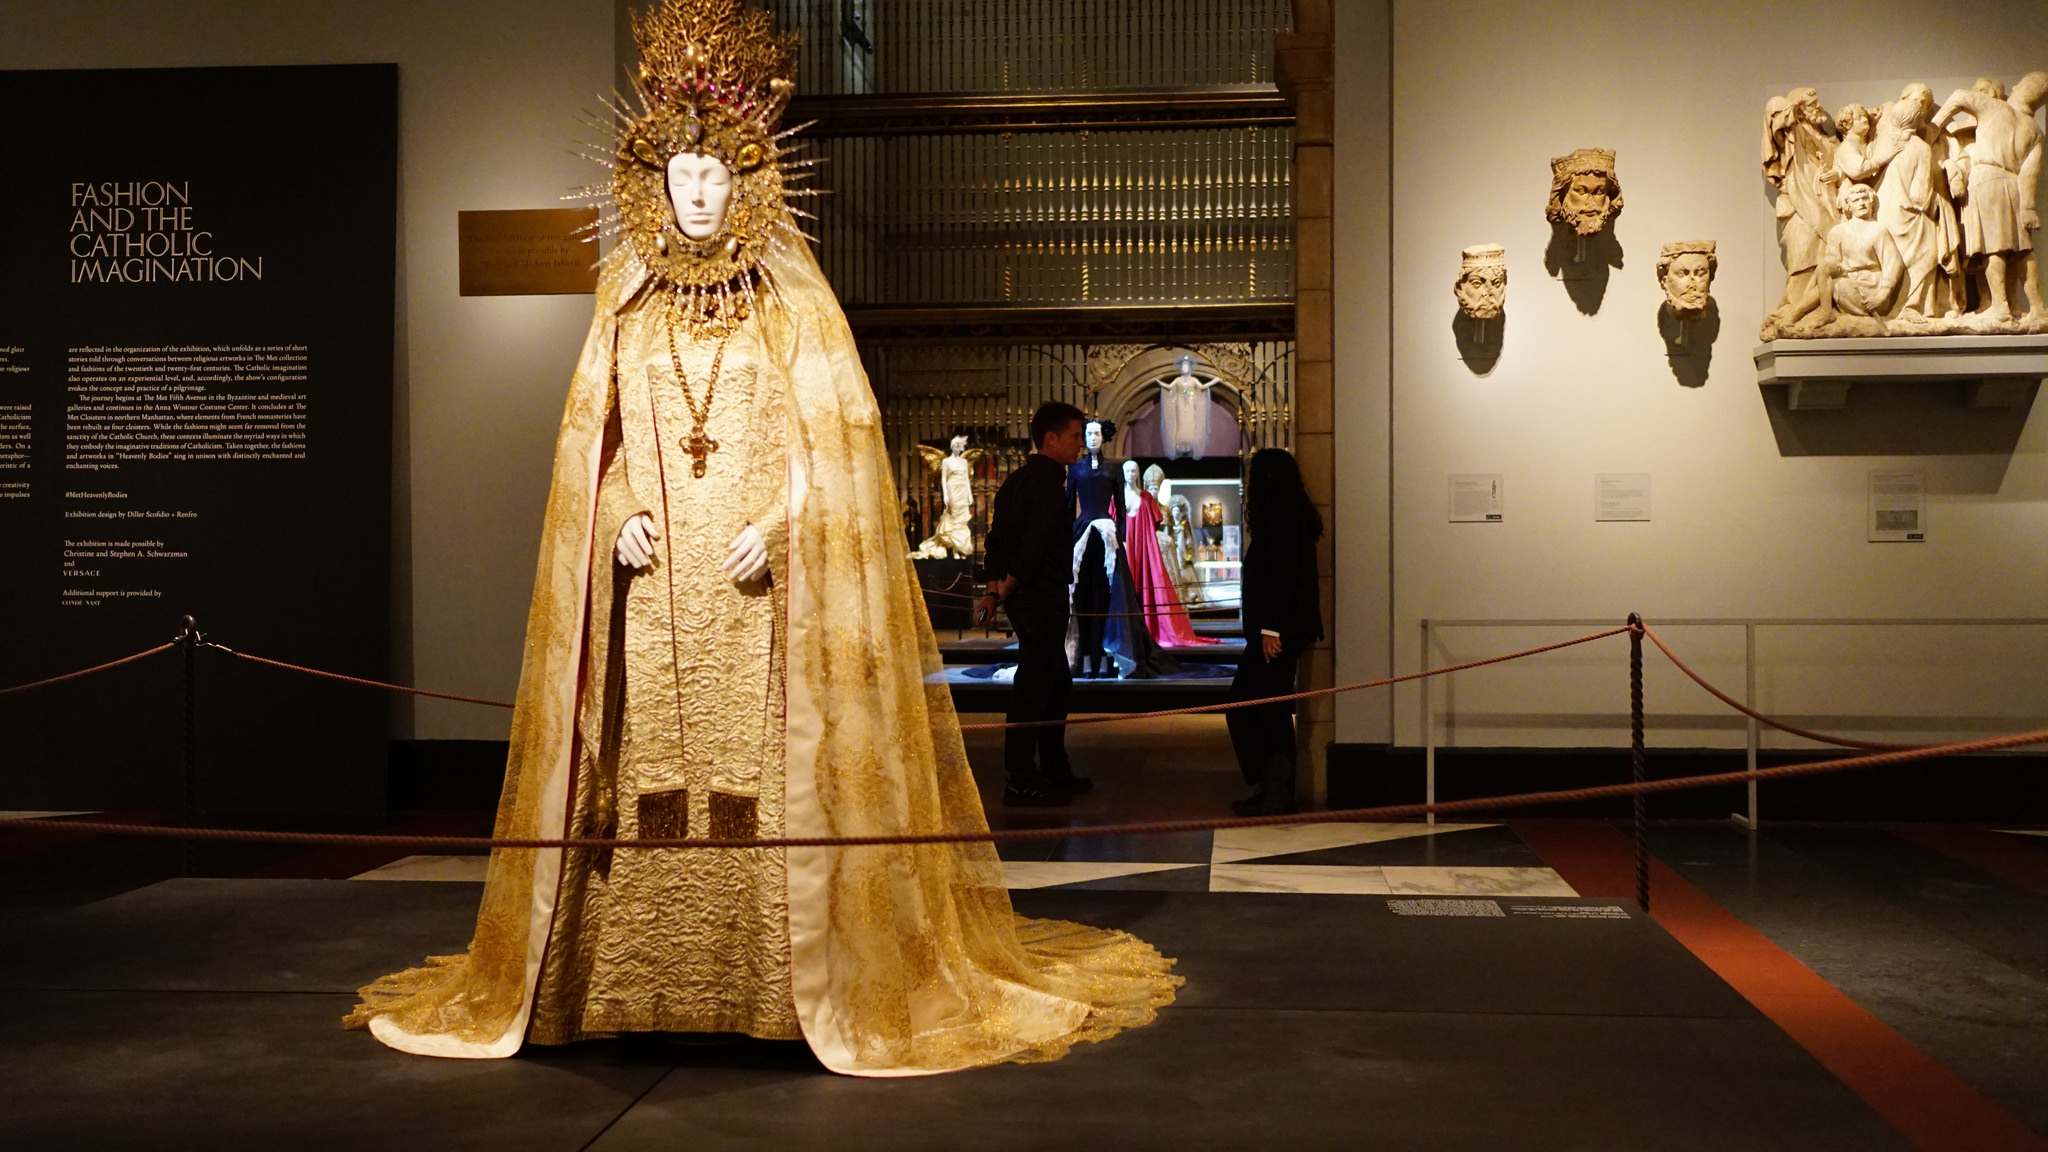 heavenly bodies10 Heavenly Bodies: Fashion and the Catholic Imagination in MET